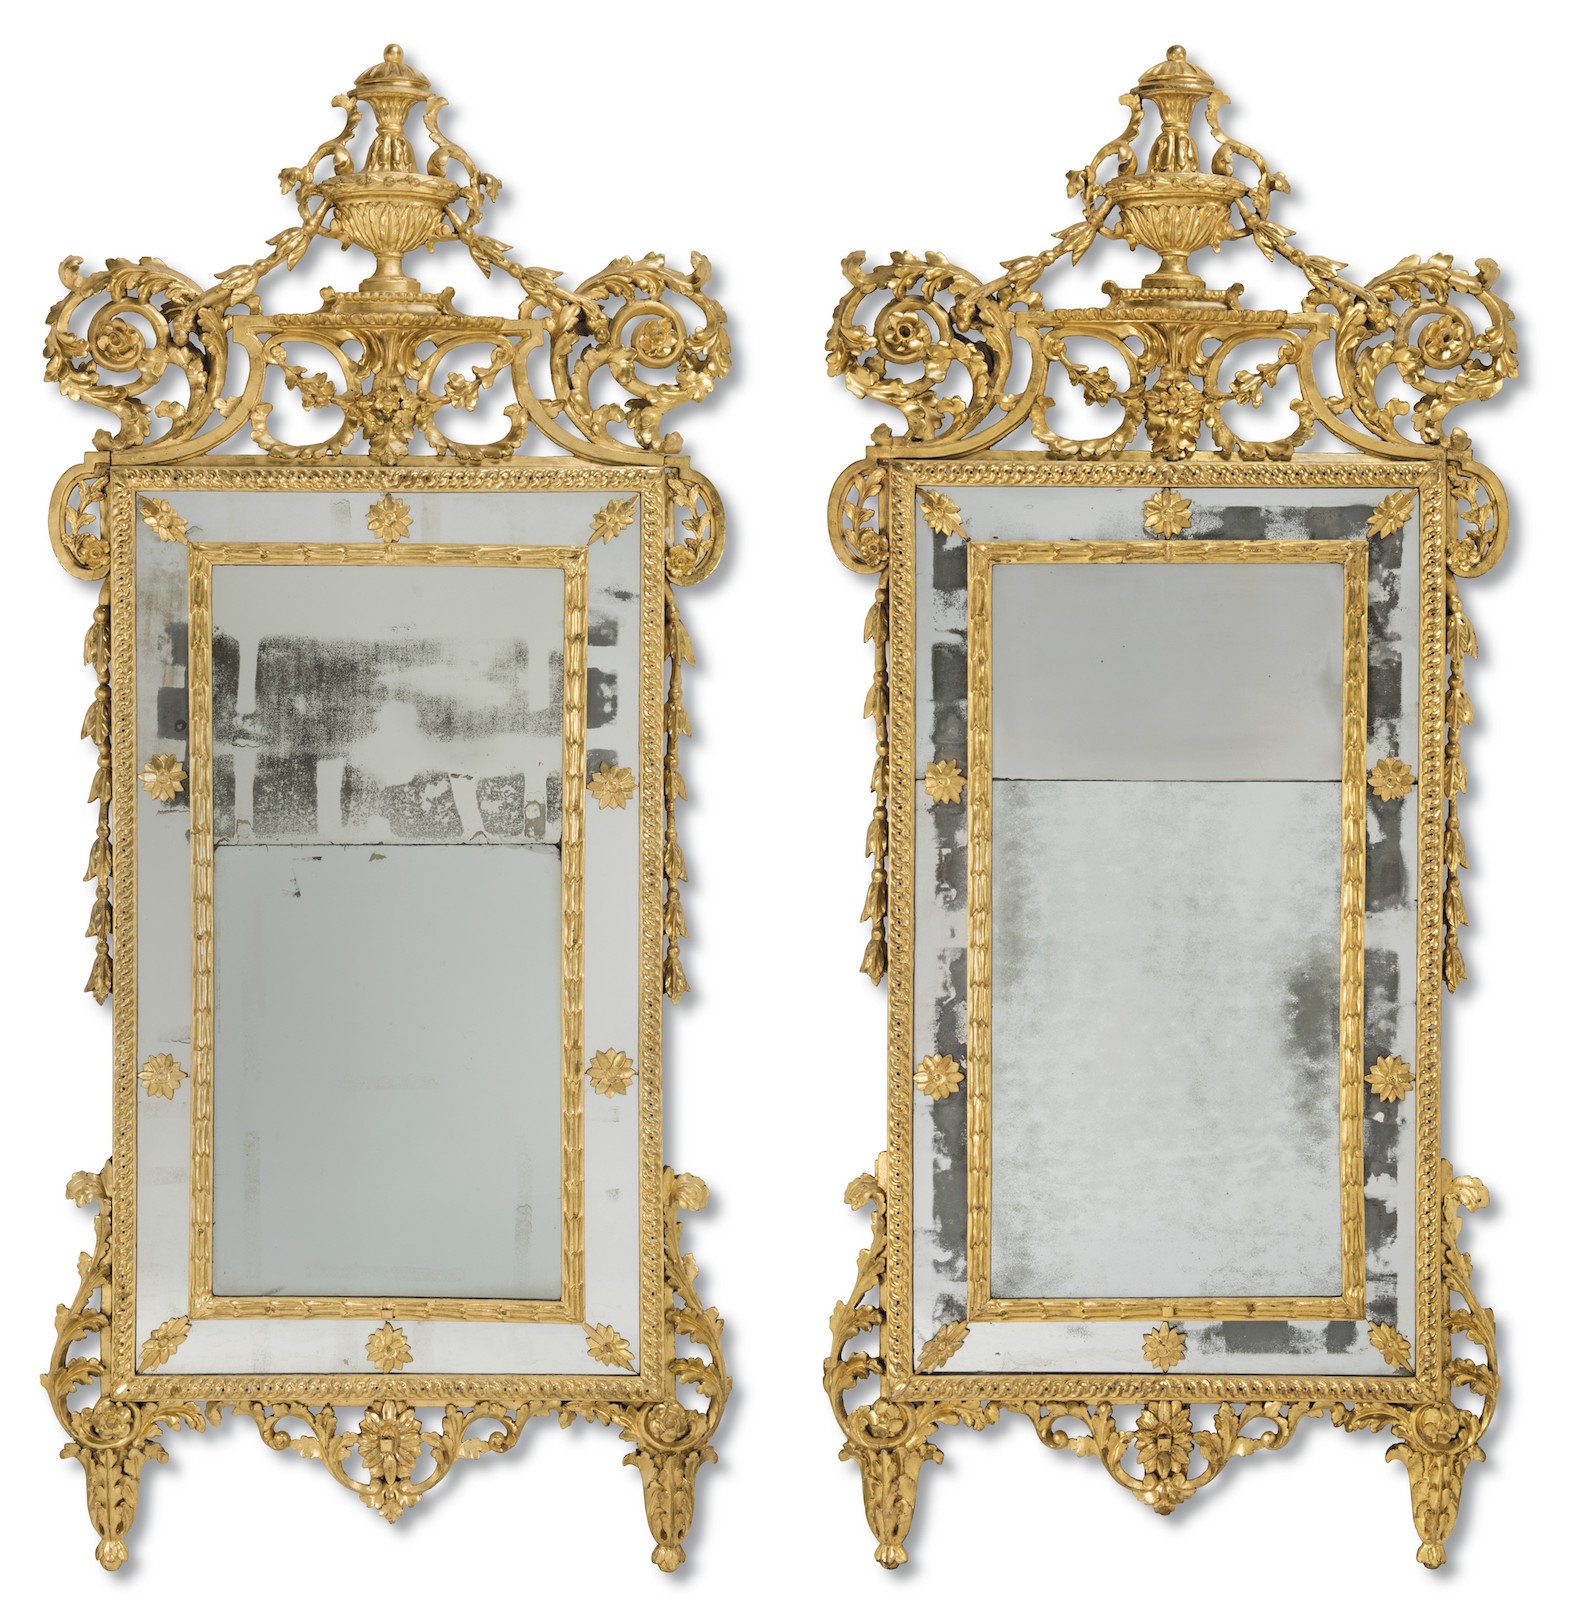 A PAIR OF ITALIAN NEOCLASSICAL GILTWOOD PIER MIRRORS